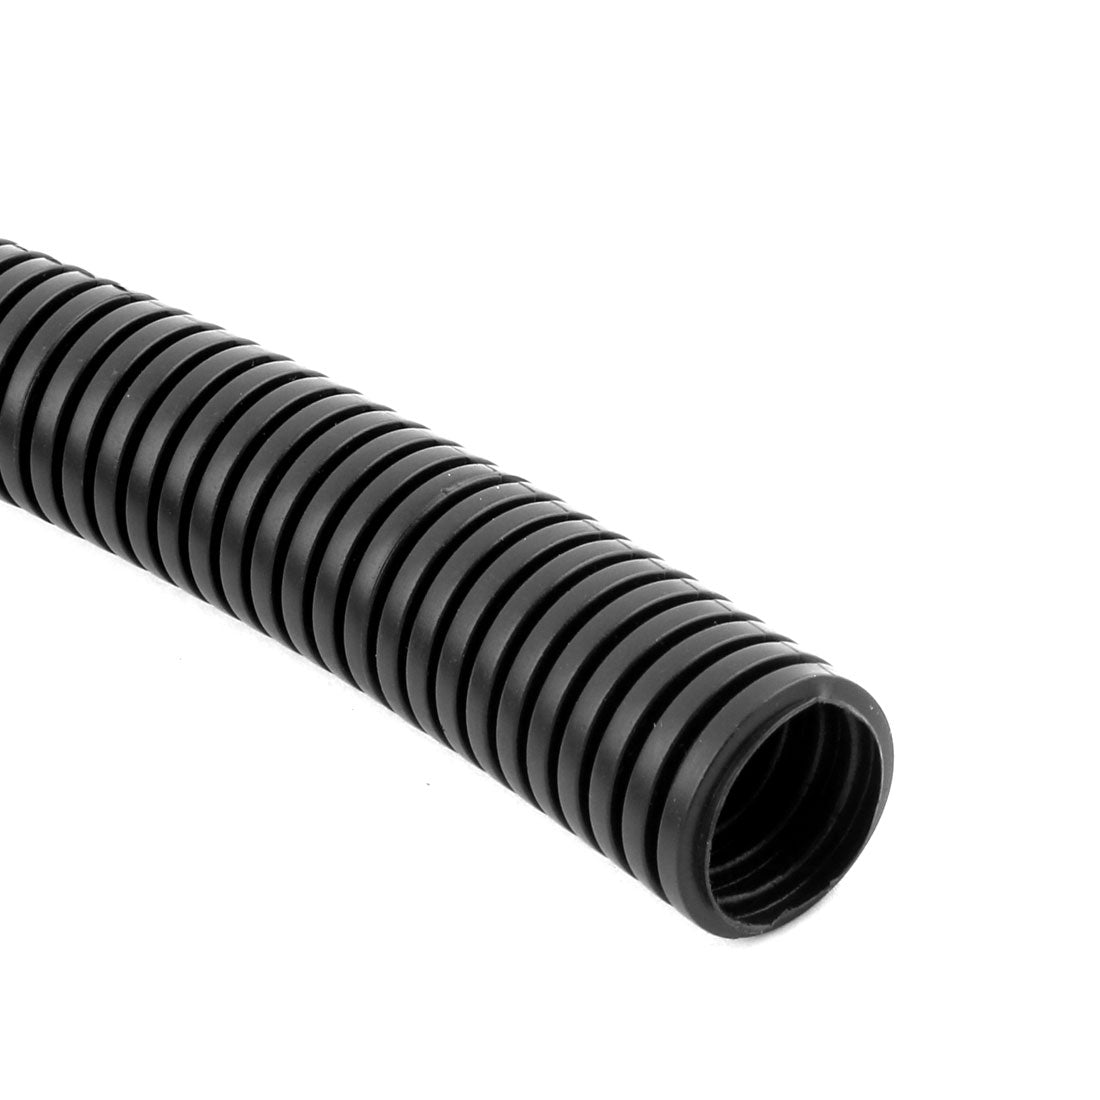 uxcell Uxcell 2 M 24 x 28 mm PVC Flexible Corrugated Conduit Tube for Garden,Office Black